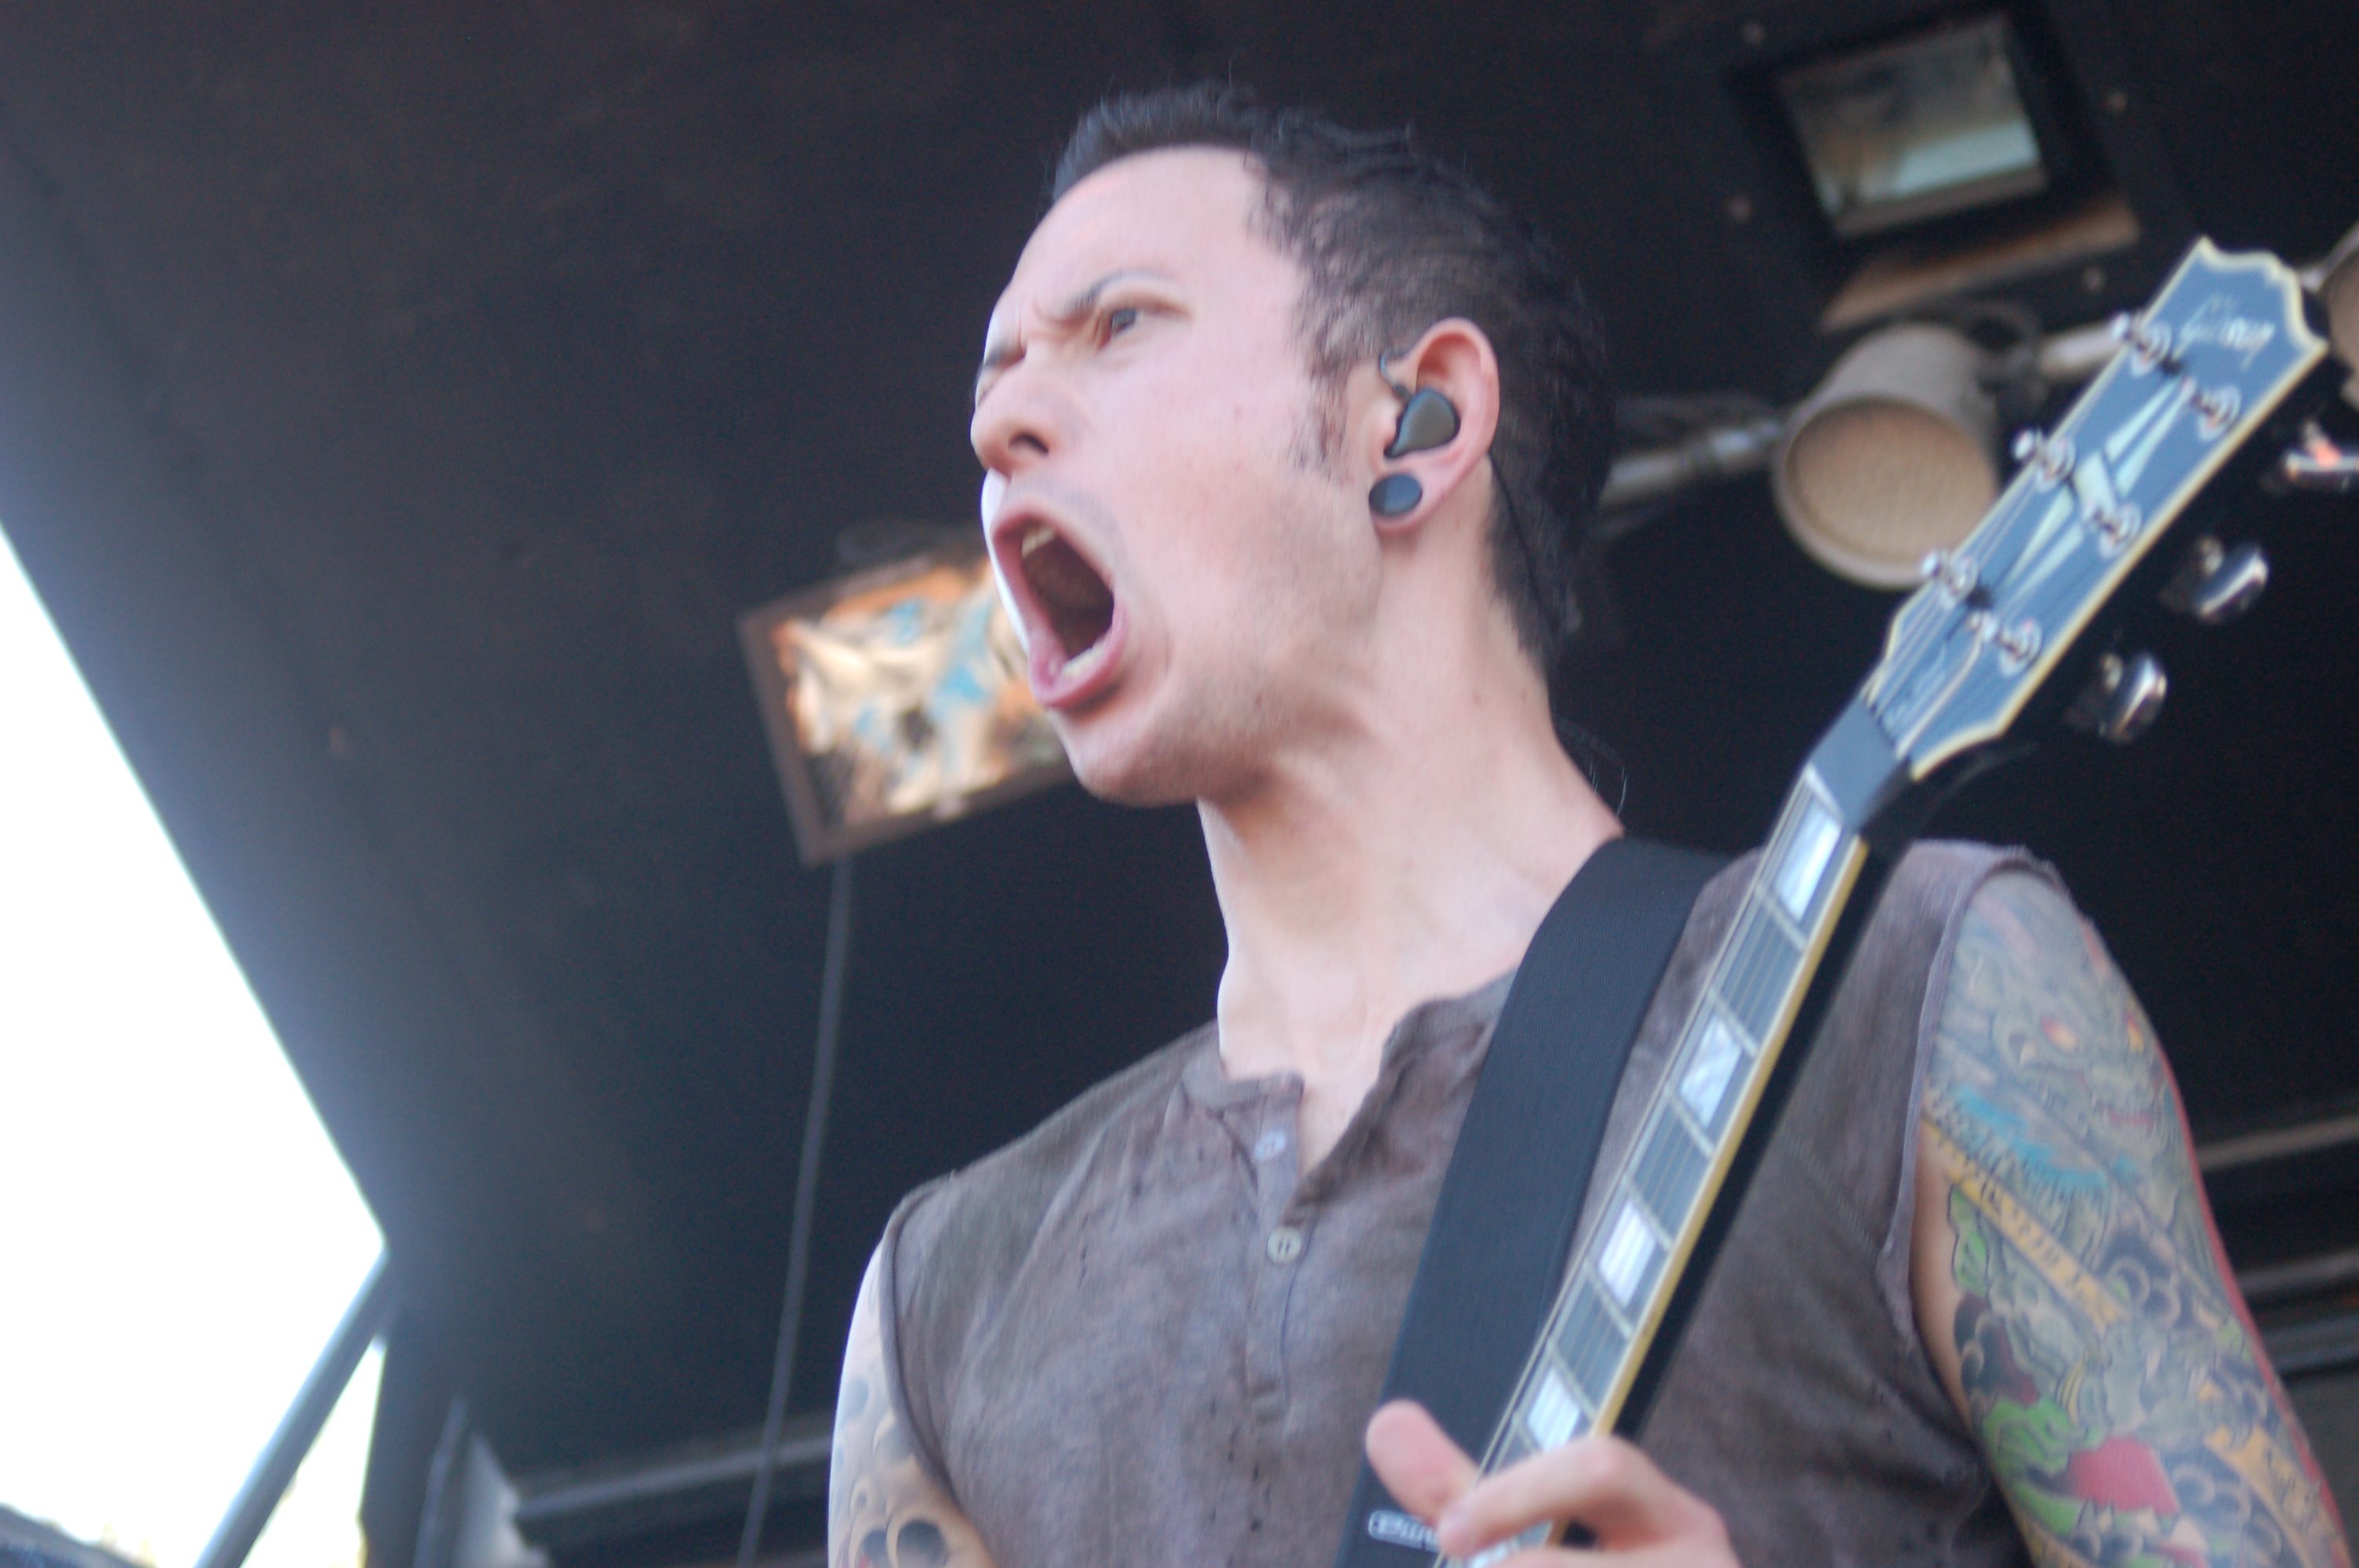 Matt Heafy Of Trivium Covers “Jack’s Lament” From The Nightmare Before Christmas